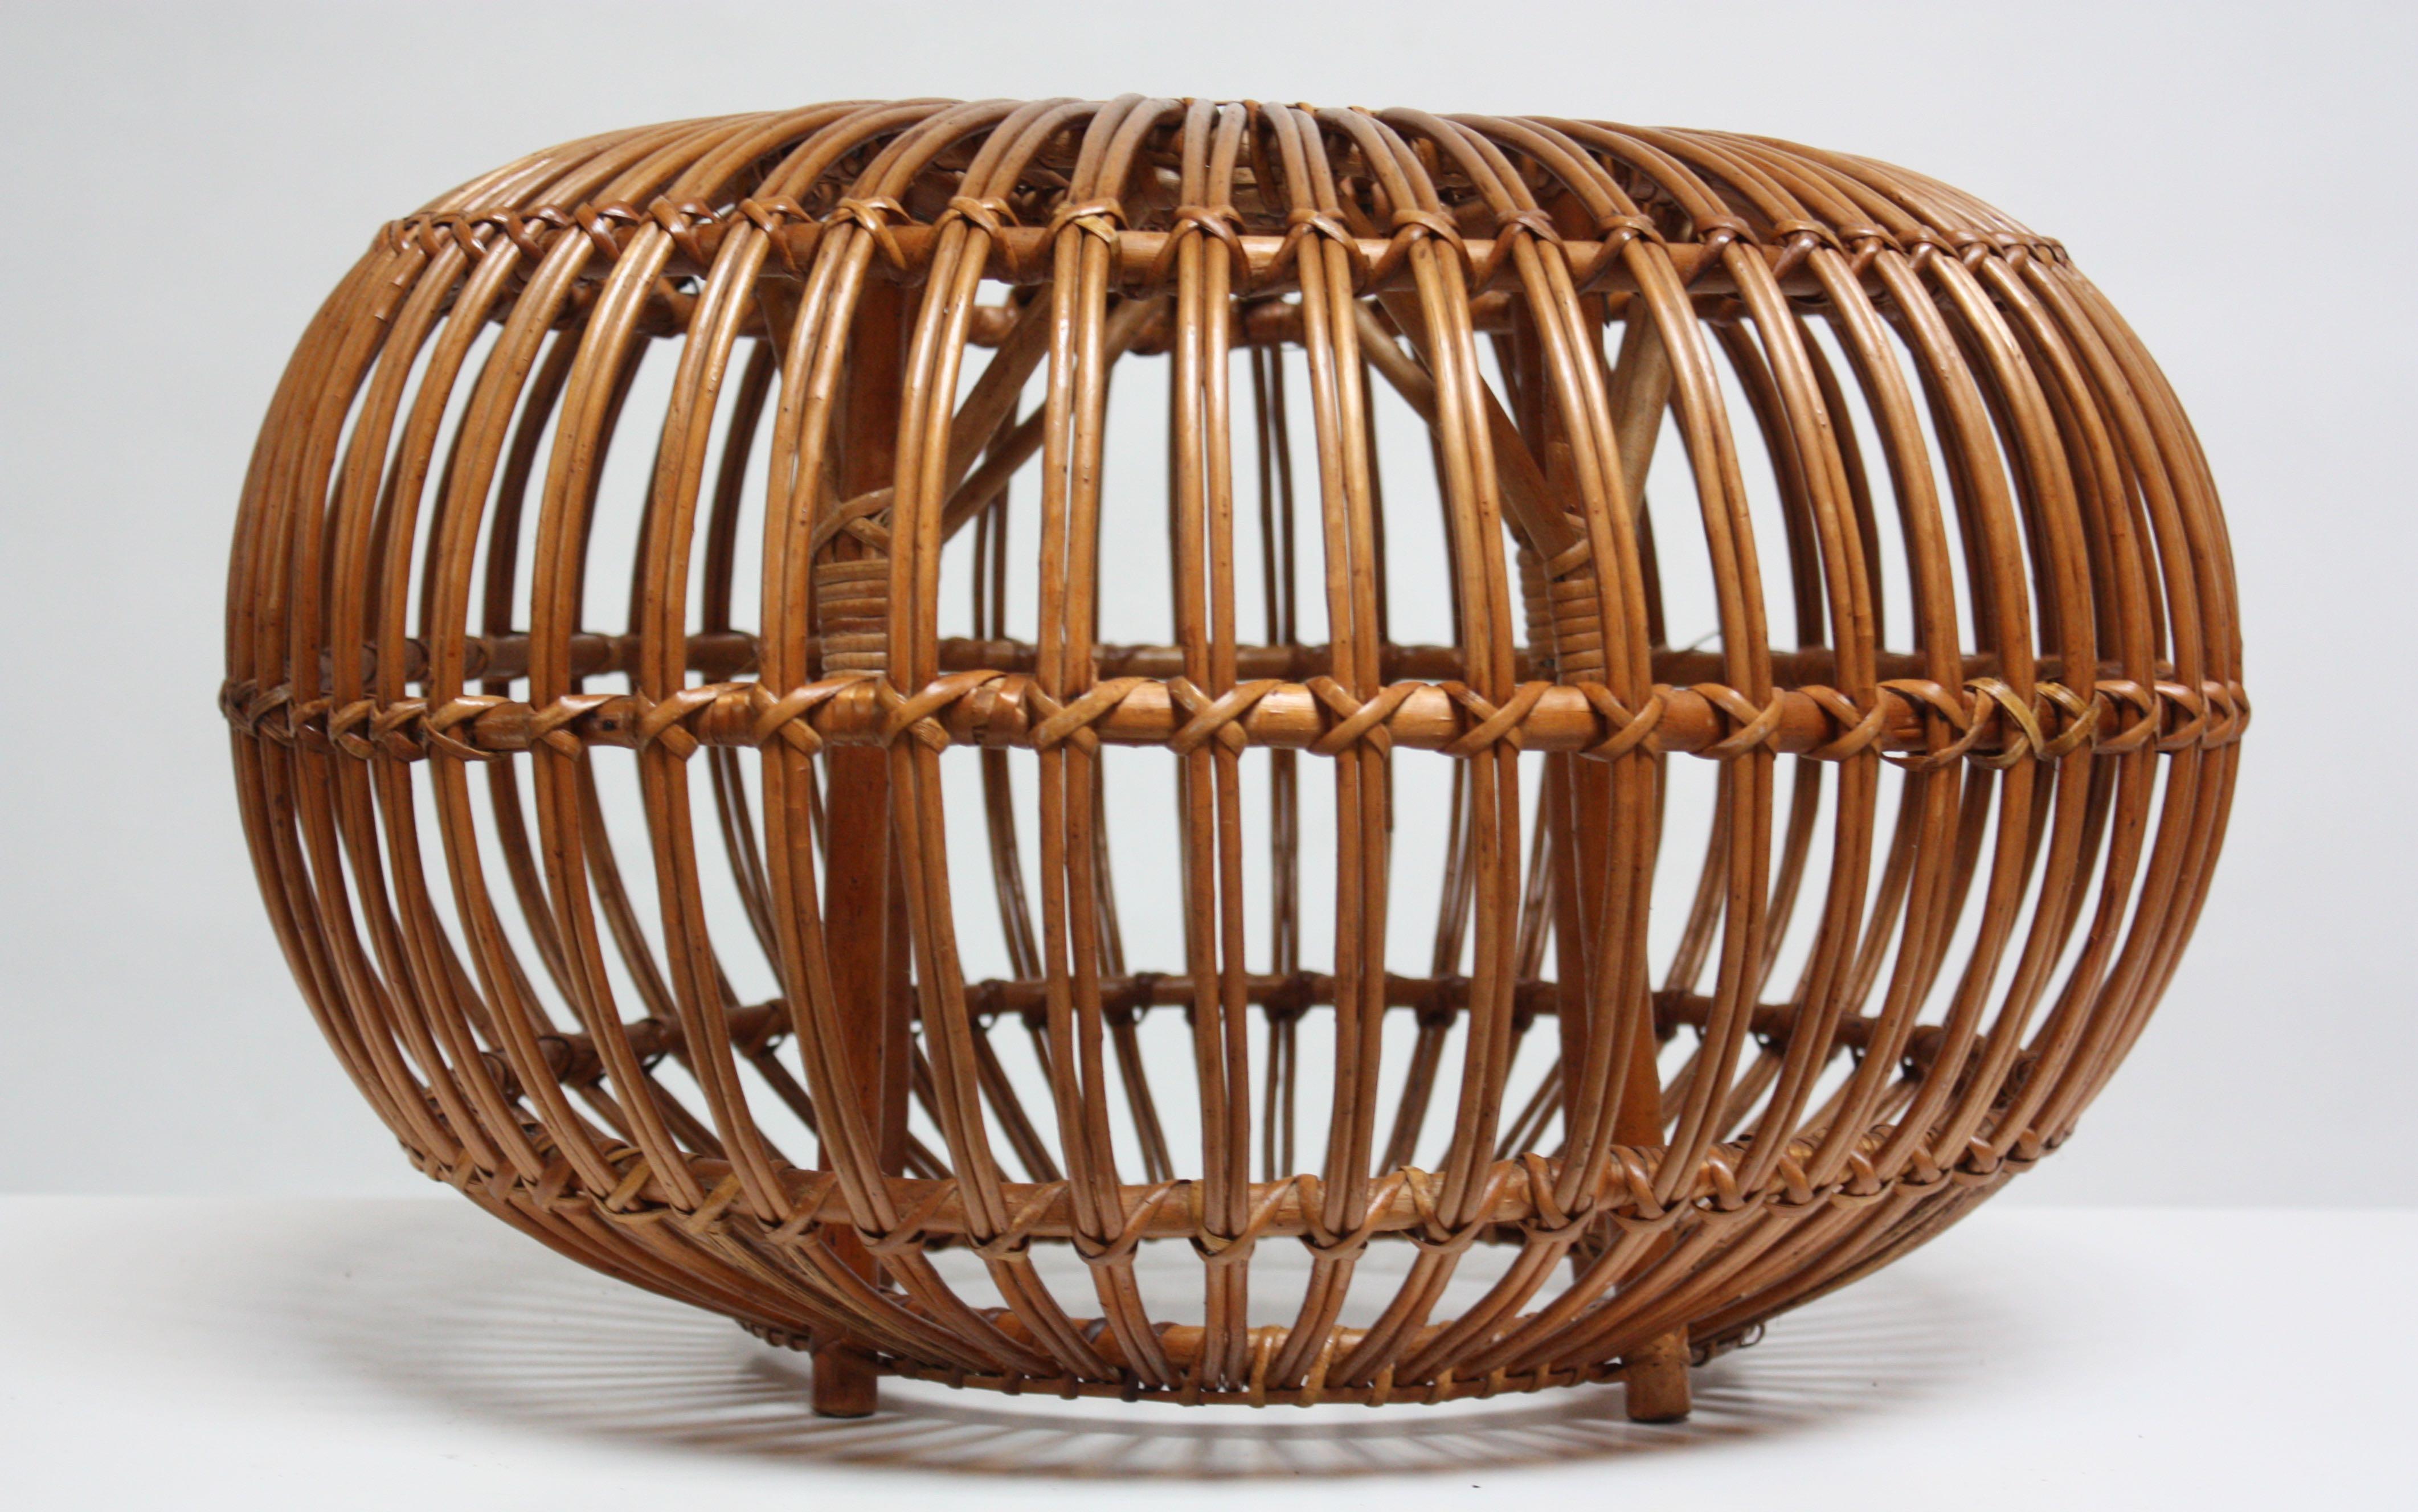 This rattan pouf or ottoman was designed by Franco Albini for Vittorio Bonacina in the 1950s and is composed solely of bent-rattan weaving. All vertical and 'cross stitch' strands are completely intact, and the piece is in excellent, original